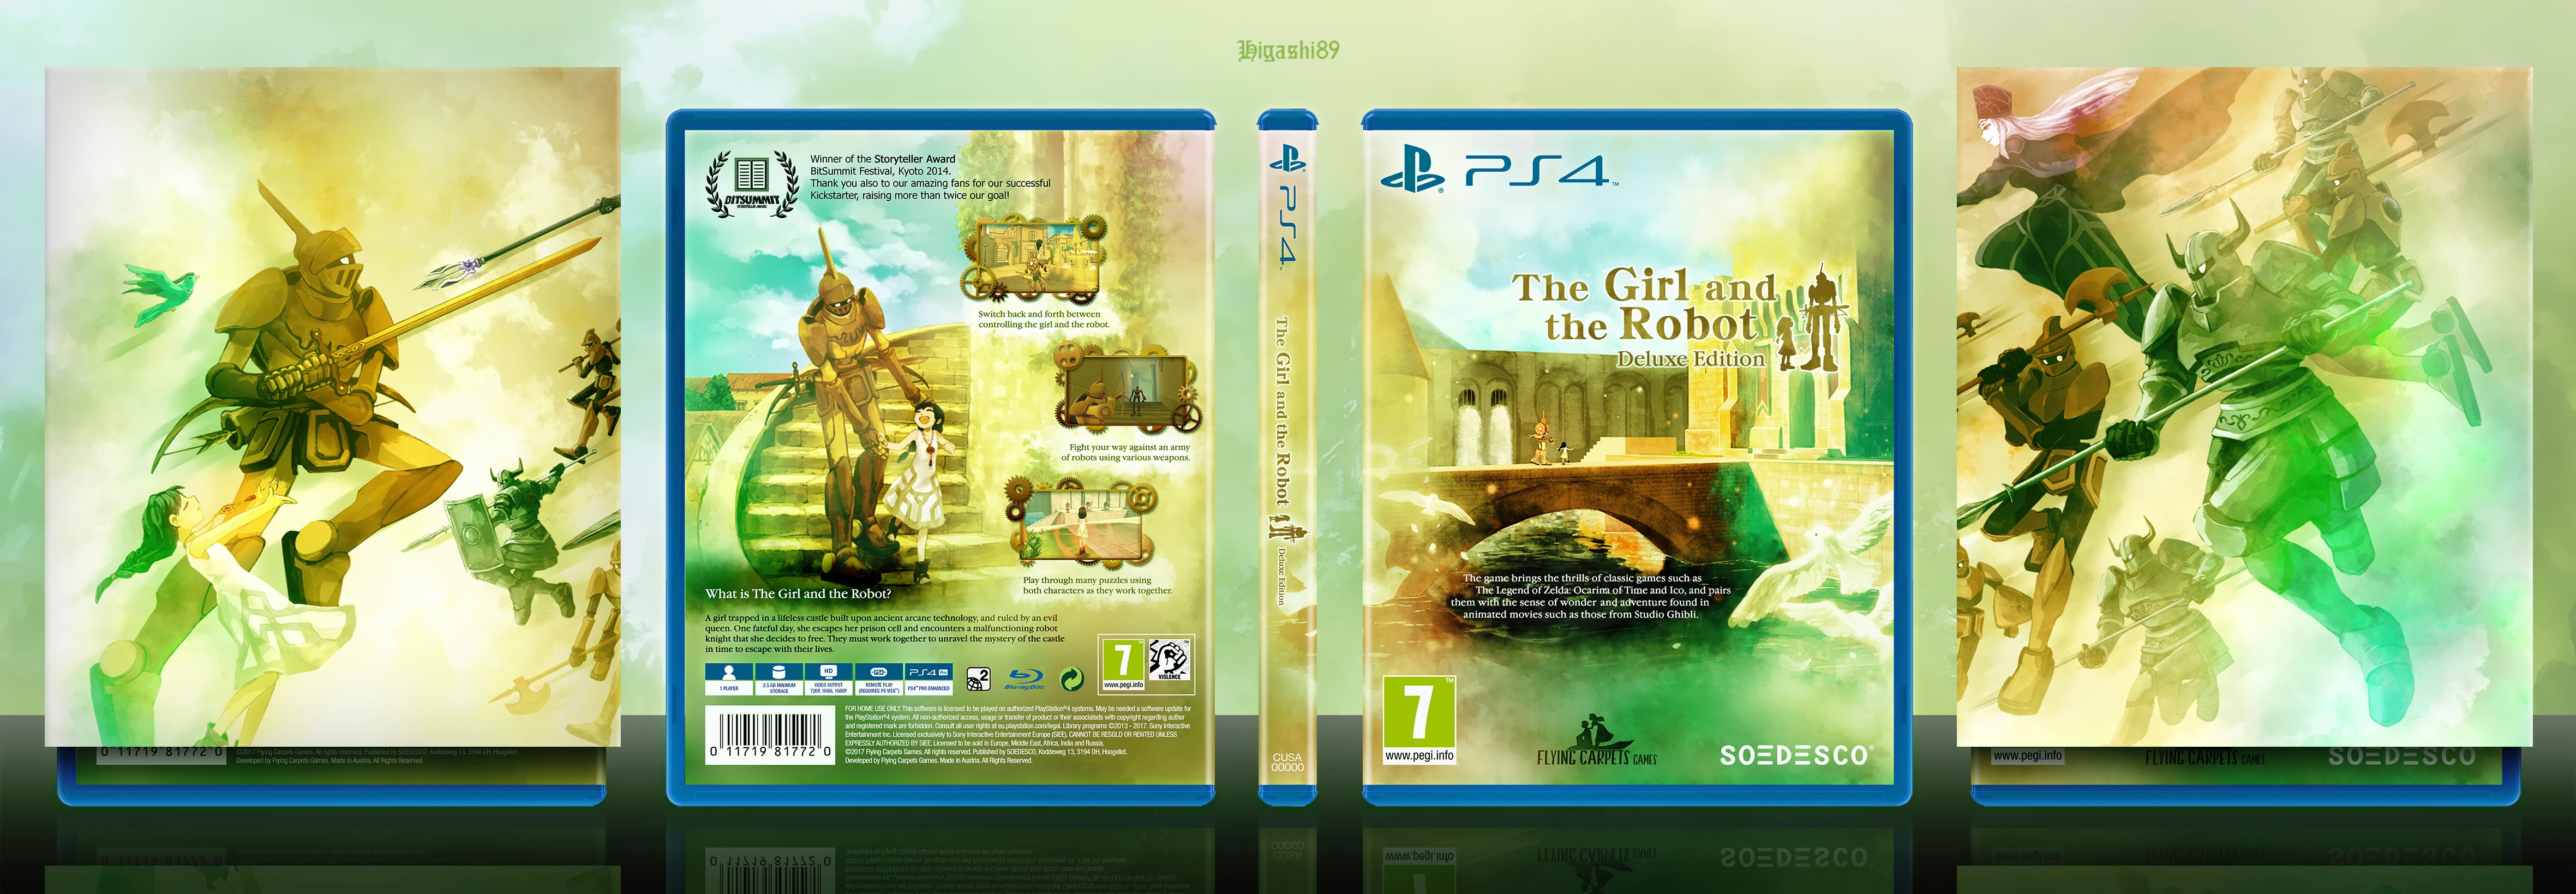 The Girl and the Robot box cover